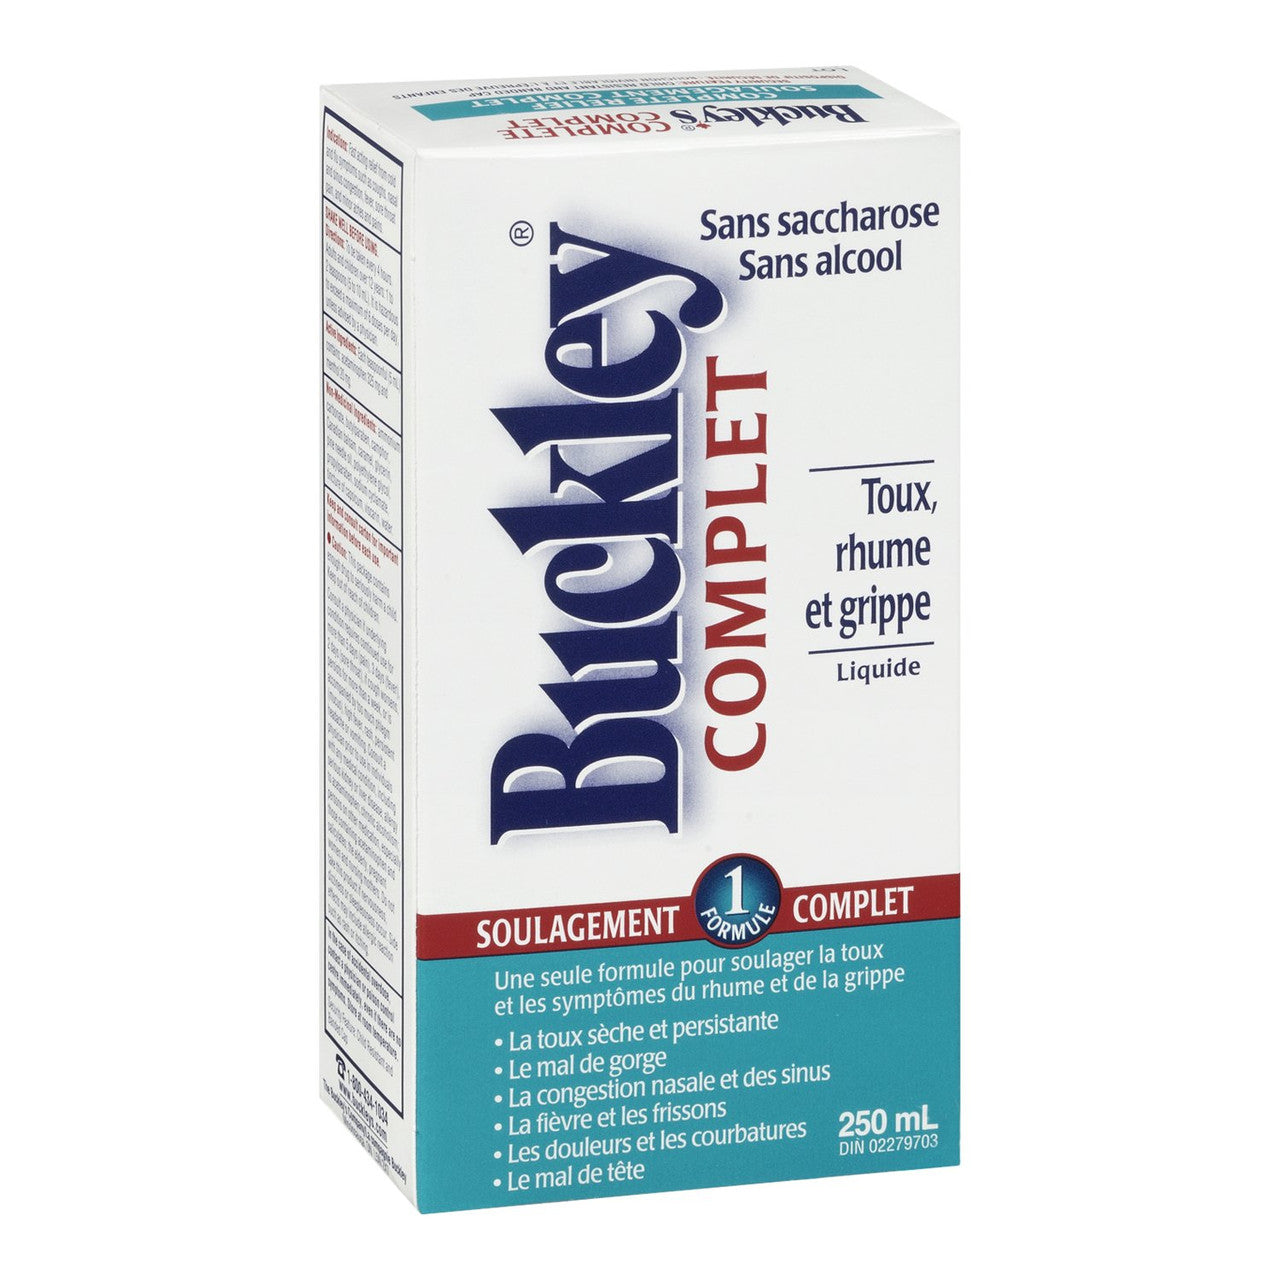 BUCKLEY'S Original COUGH CONGESTION Syrup 100 ml Size 